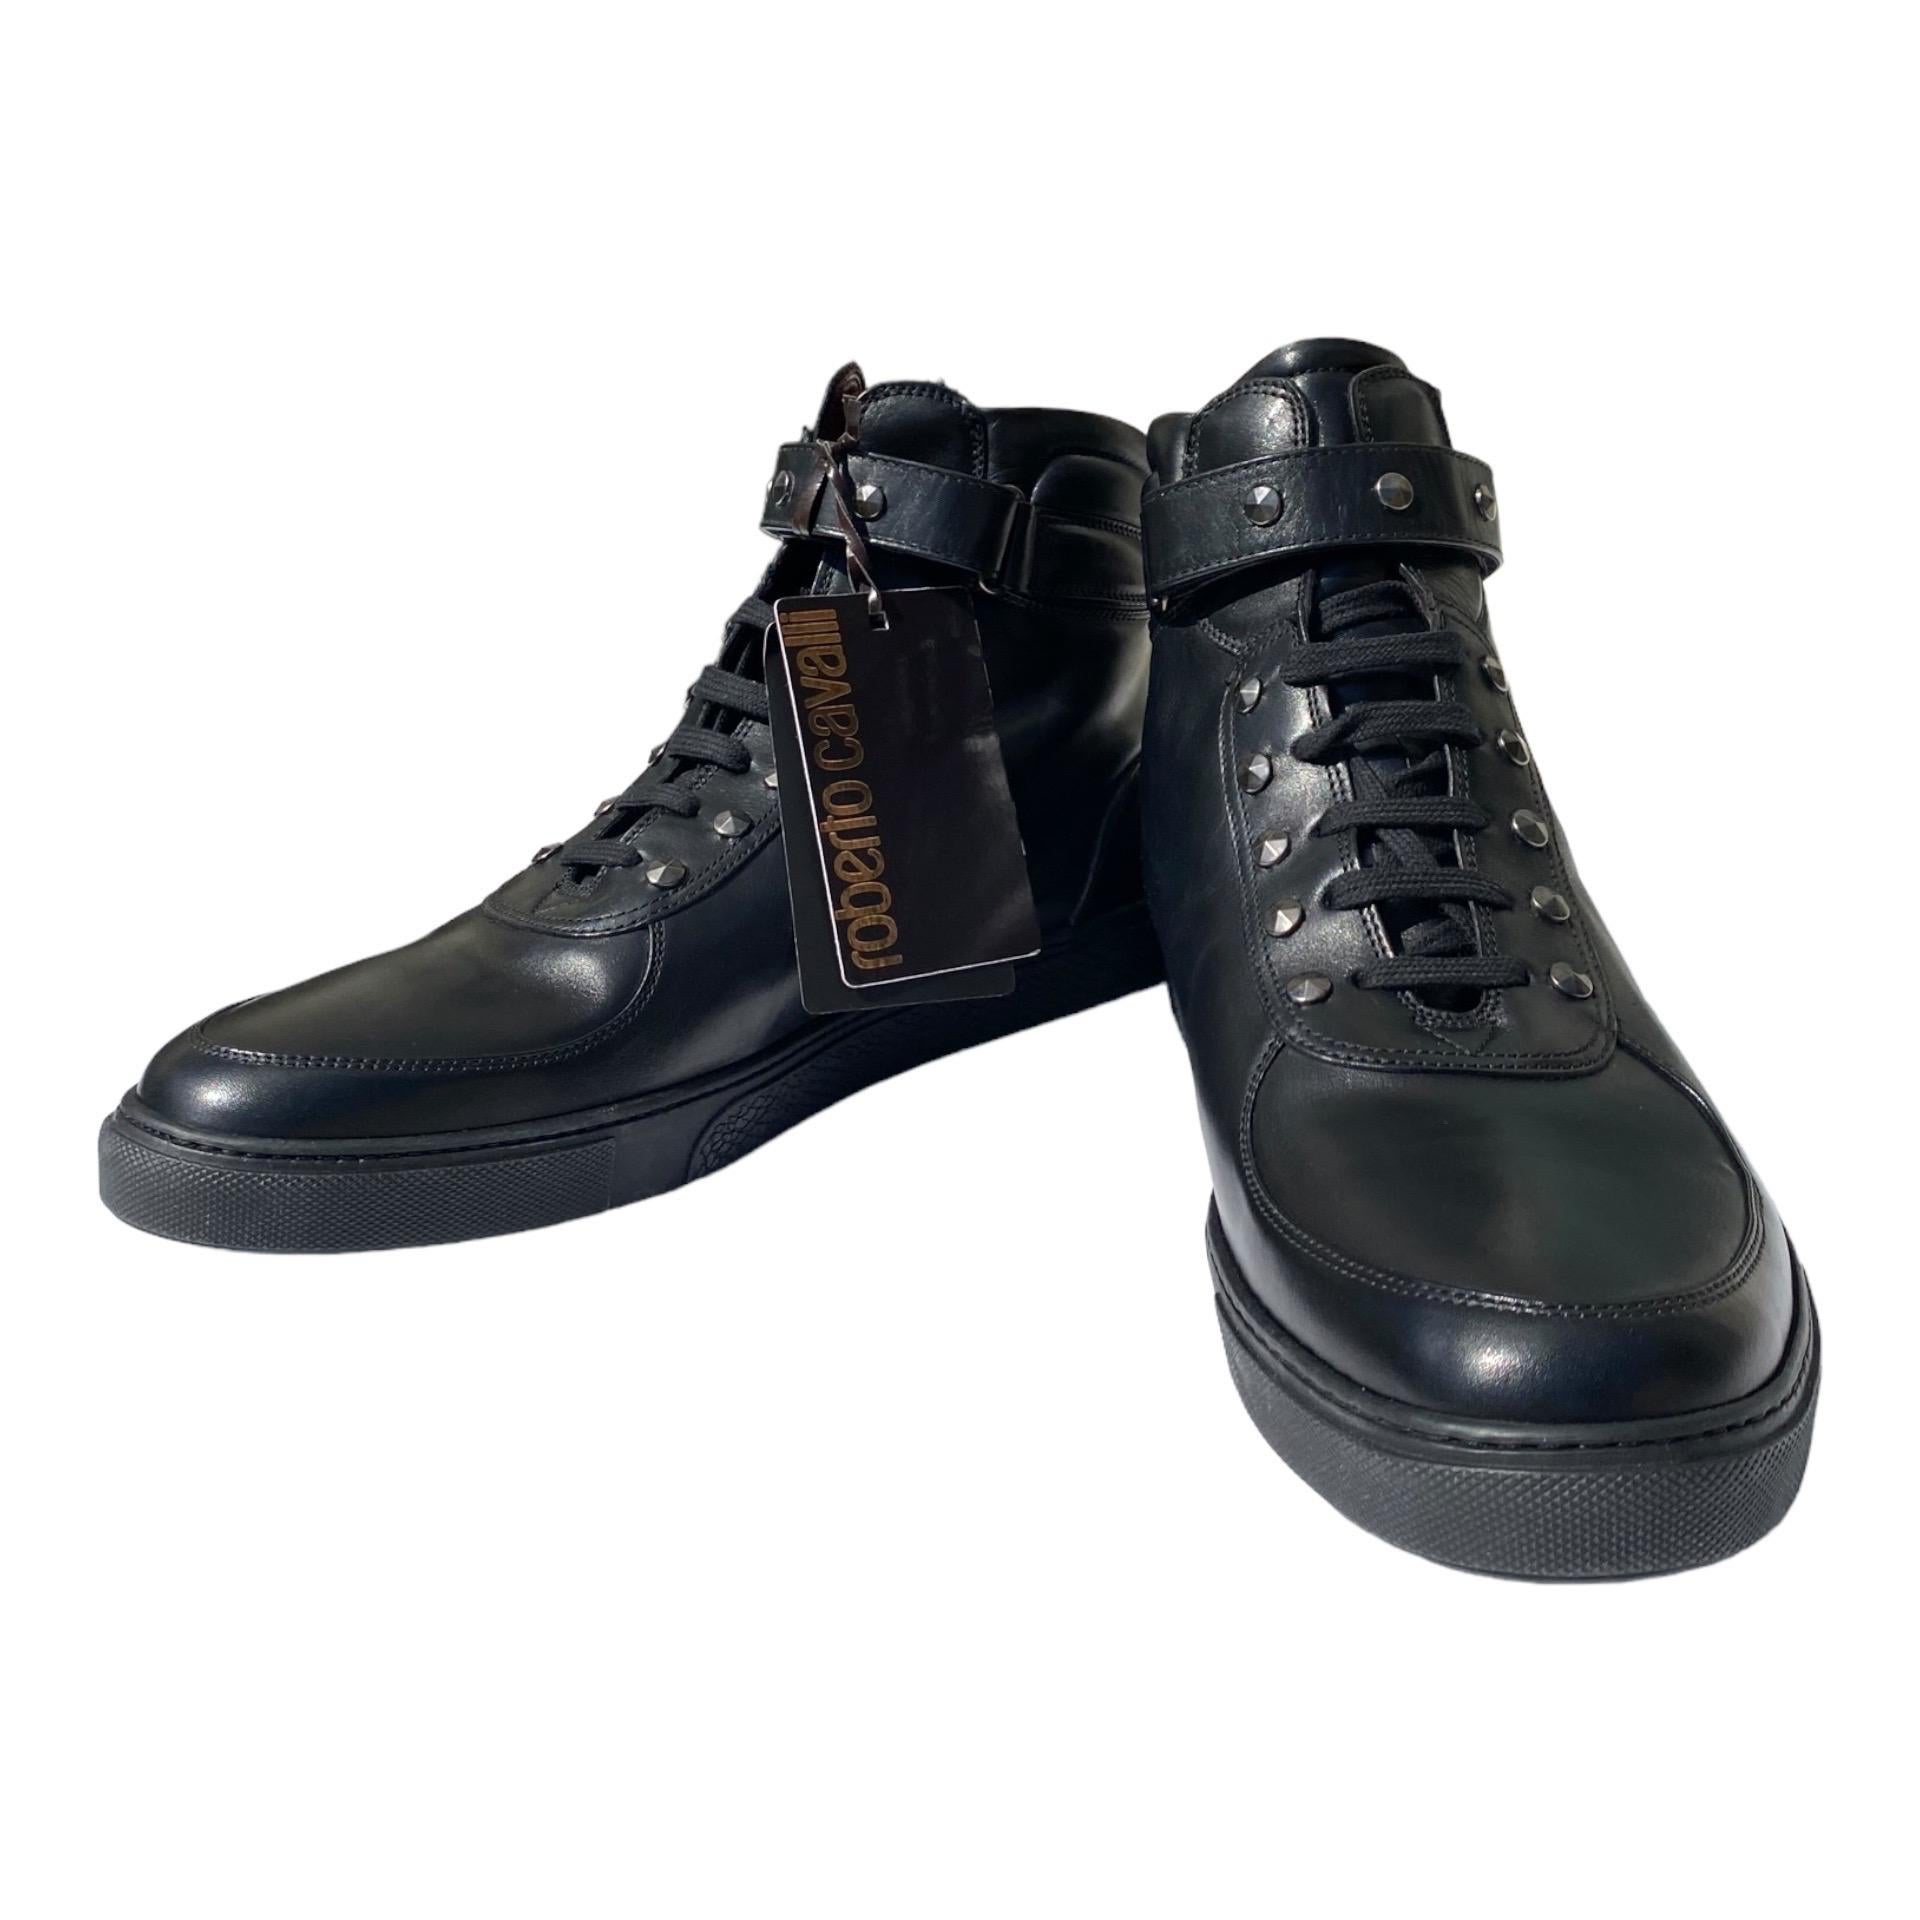 Men's New Roberto Cavalli Studded Black Leather High Top Sneakers for Men 43.5 - 45 For Sale